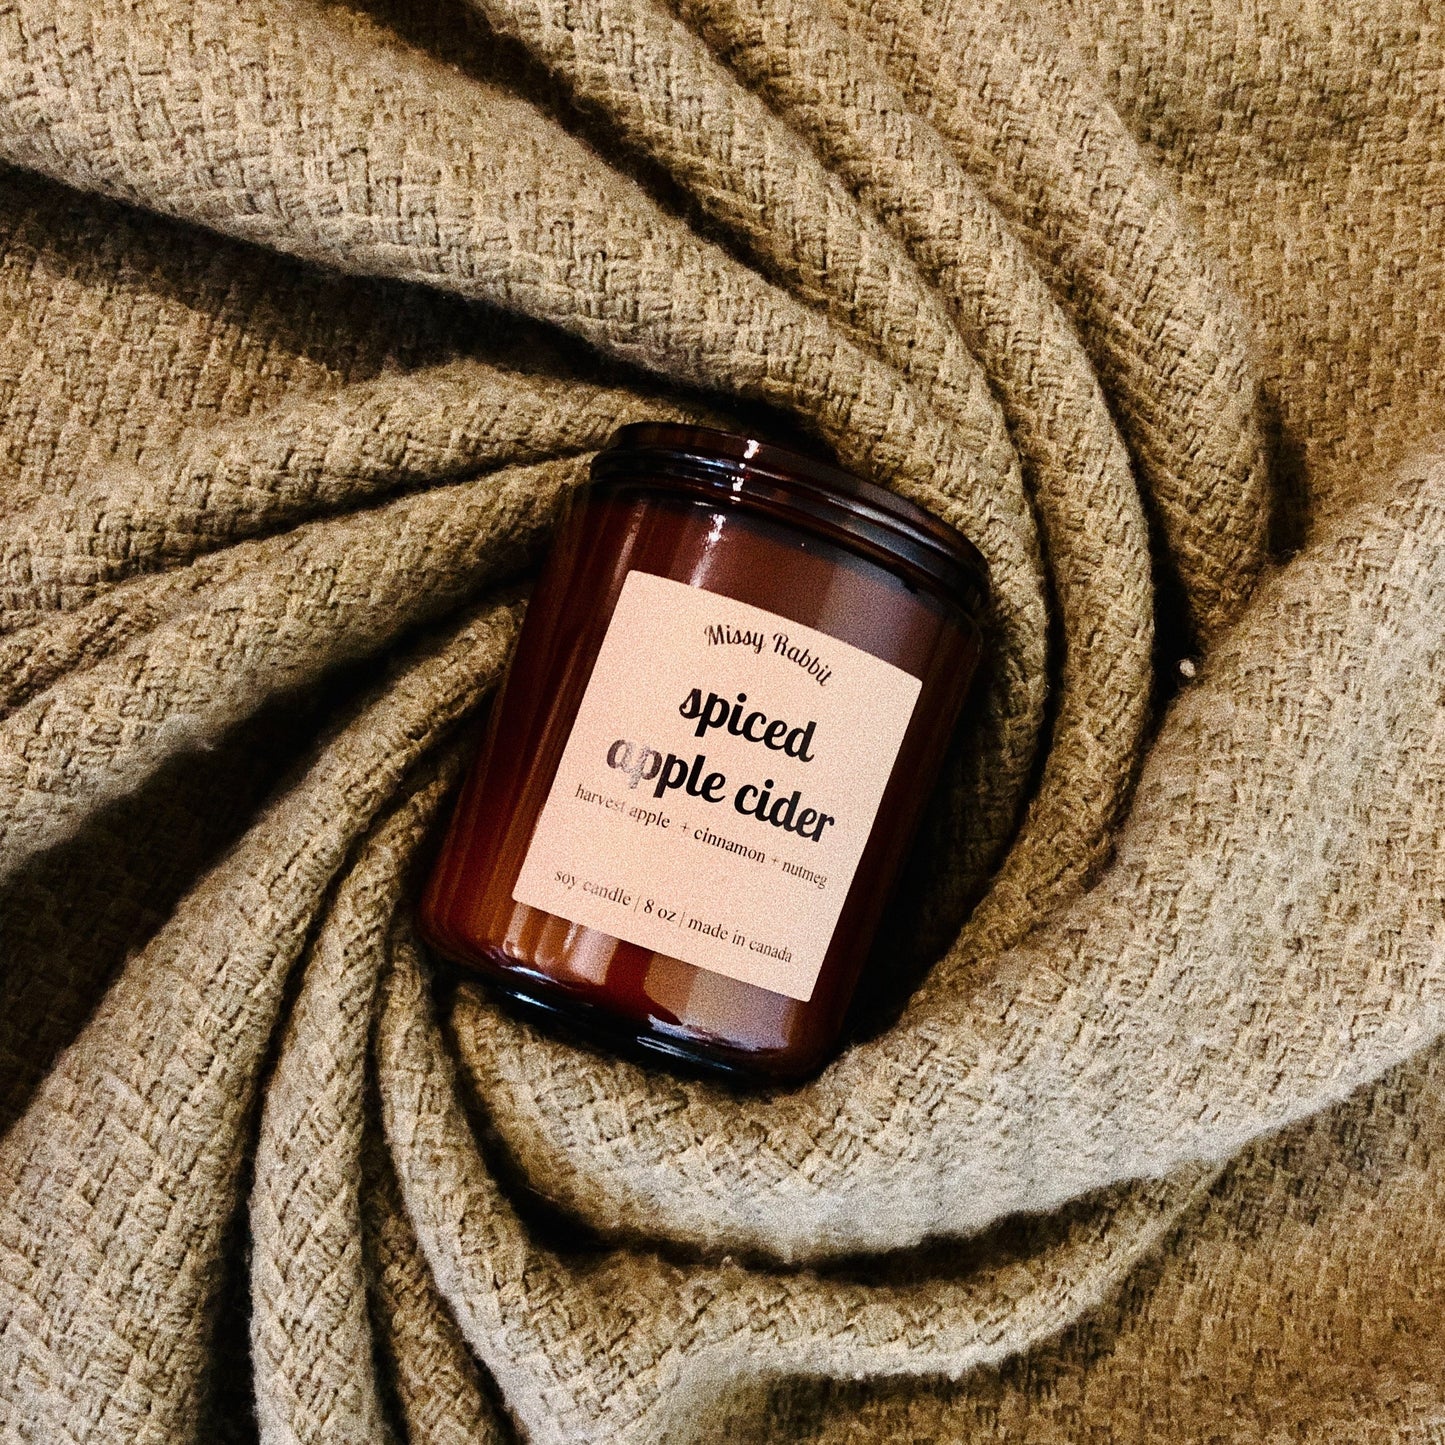 Spiced Apple Cider Handcrafted Soy Candle